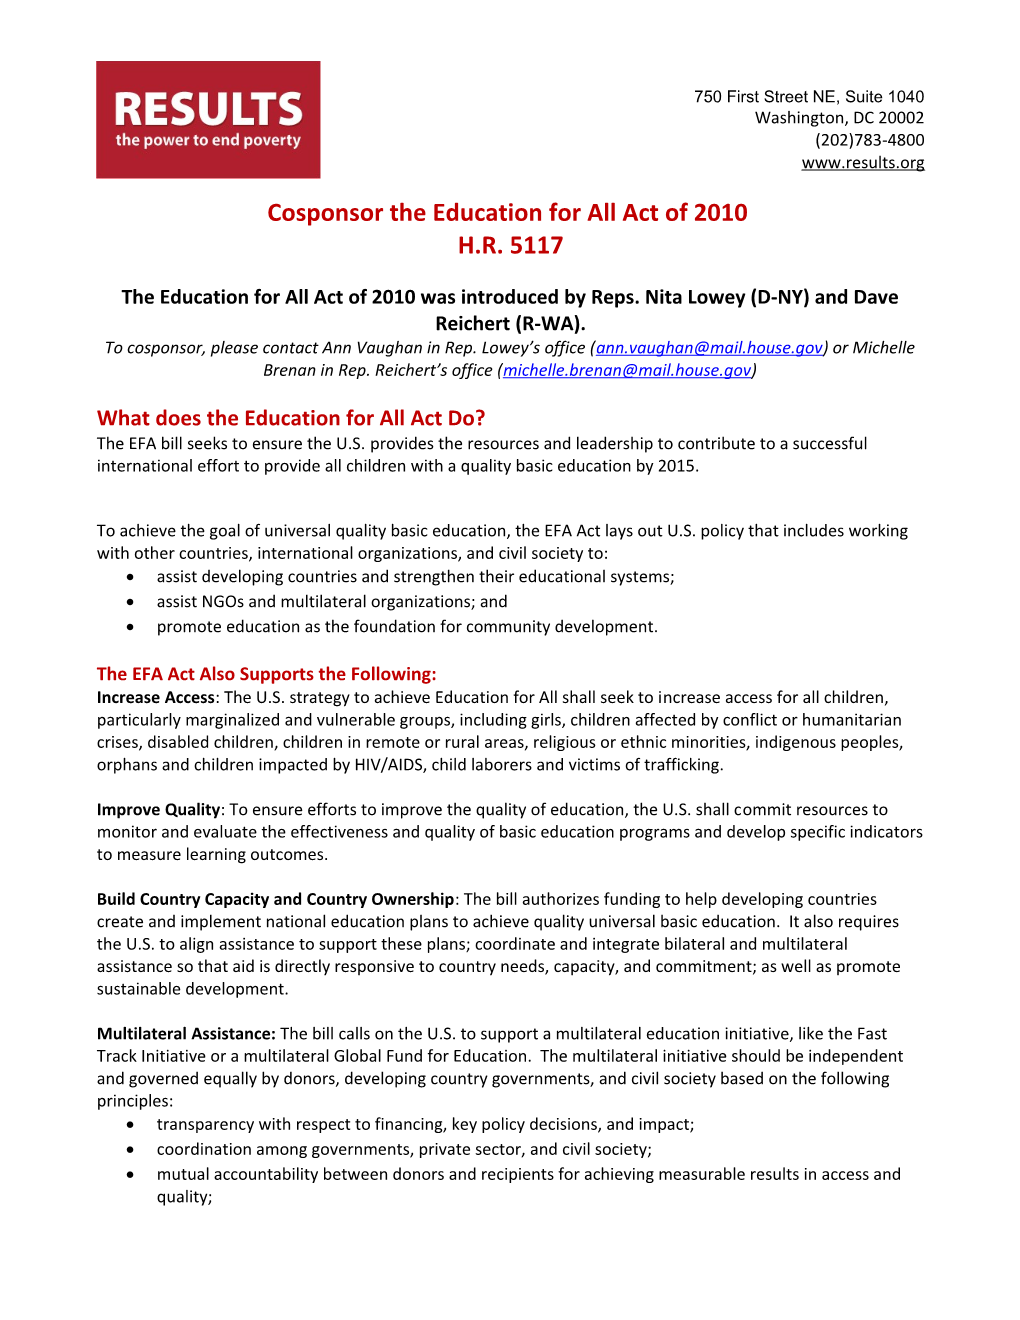 Cosponsor the Education for All Act of 2010 (H